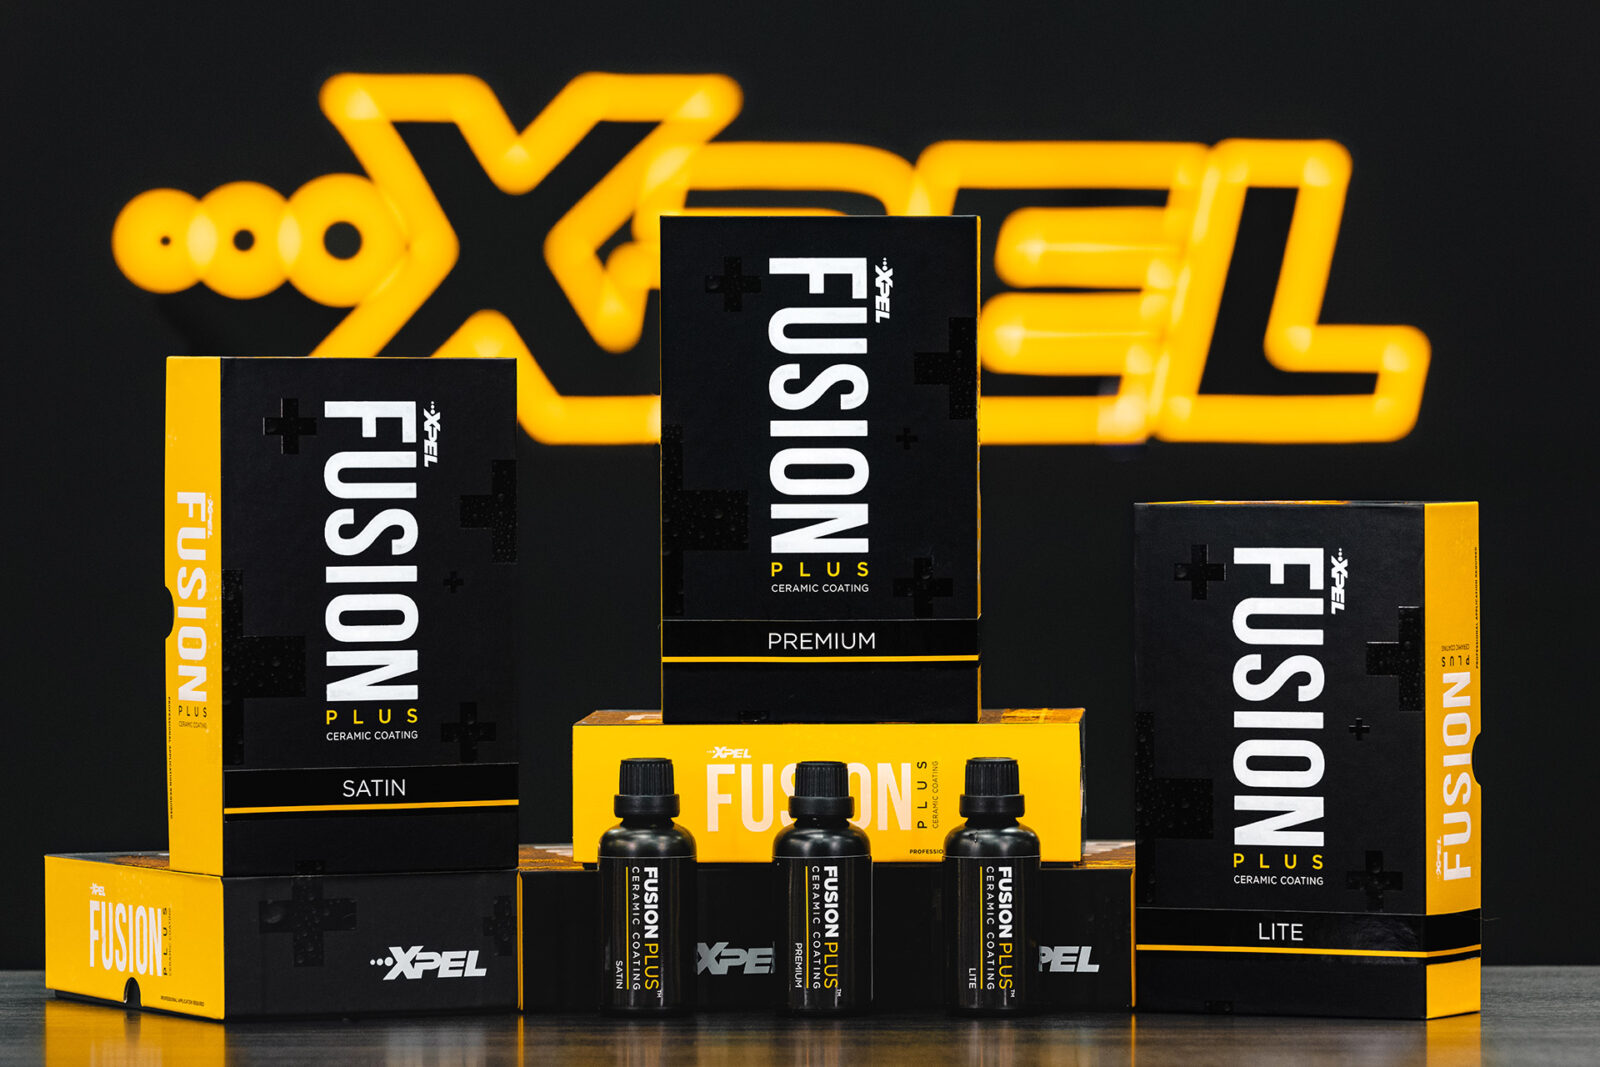 XPEL FUSION PLUS Products Line-Up